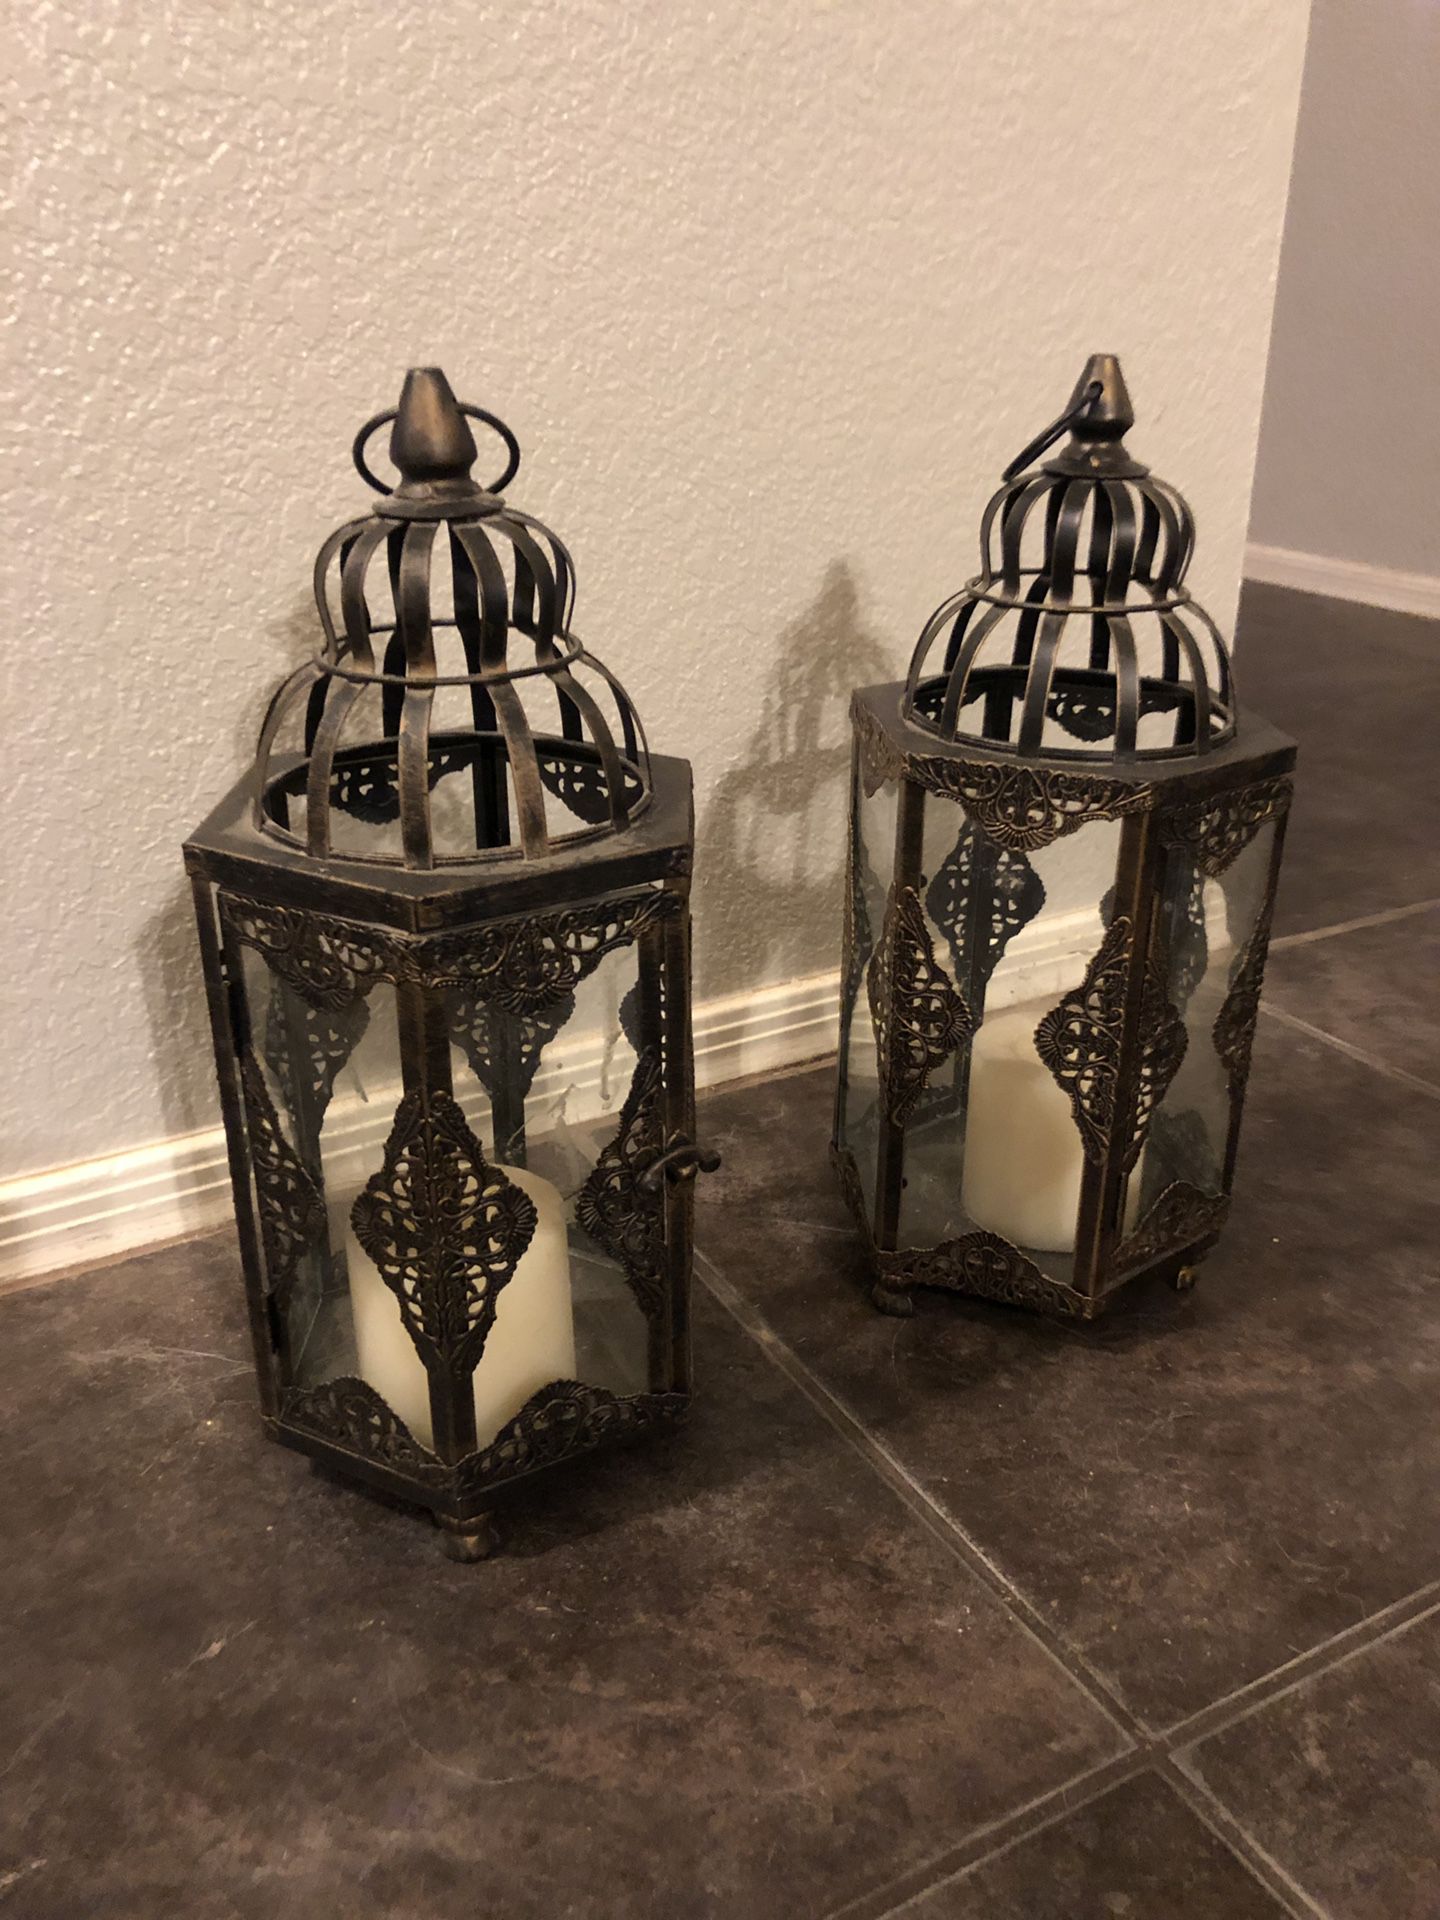 2 Lanterns with candles